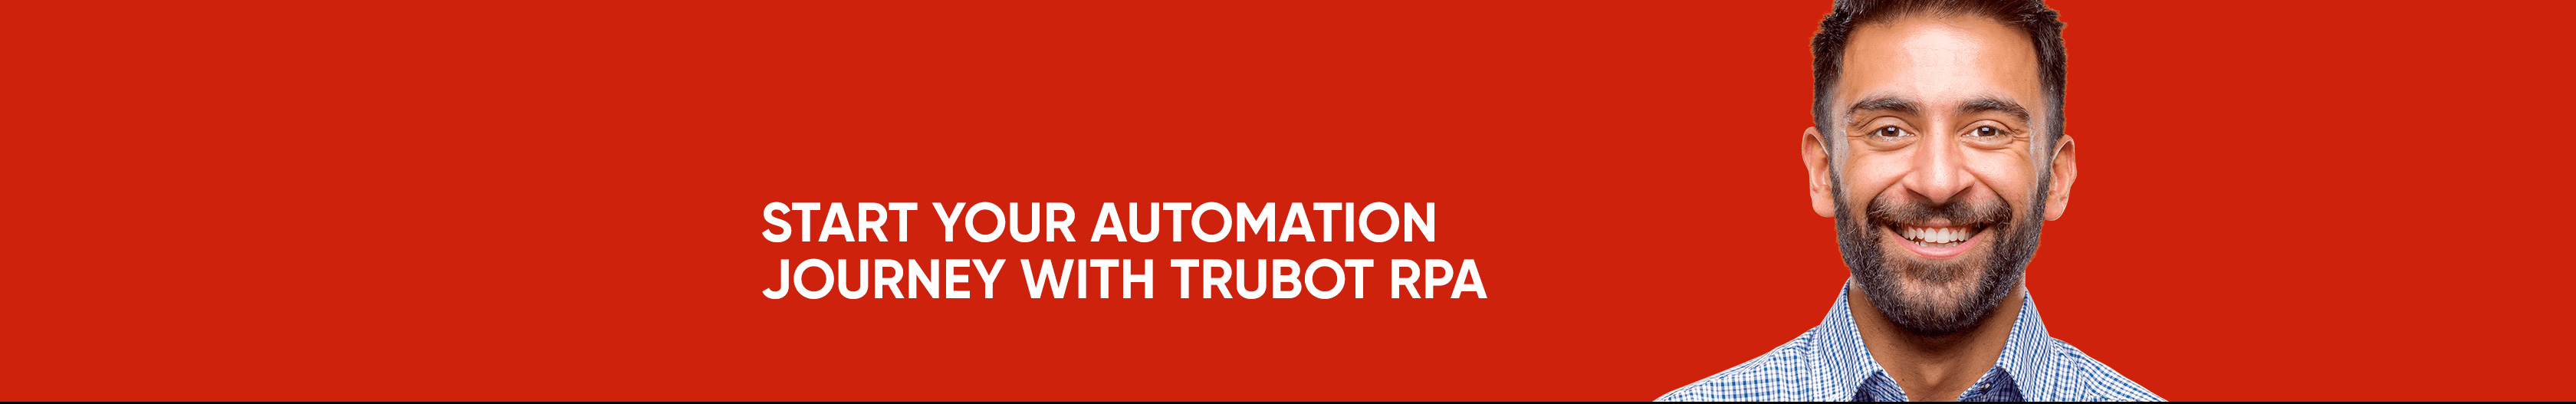 Start-your-automation-journey-with-TruBot-RPA